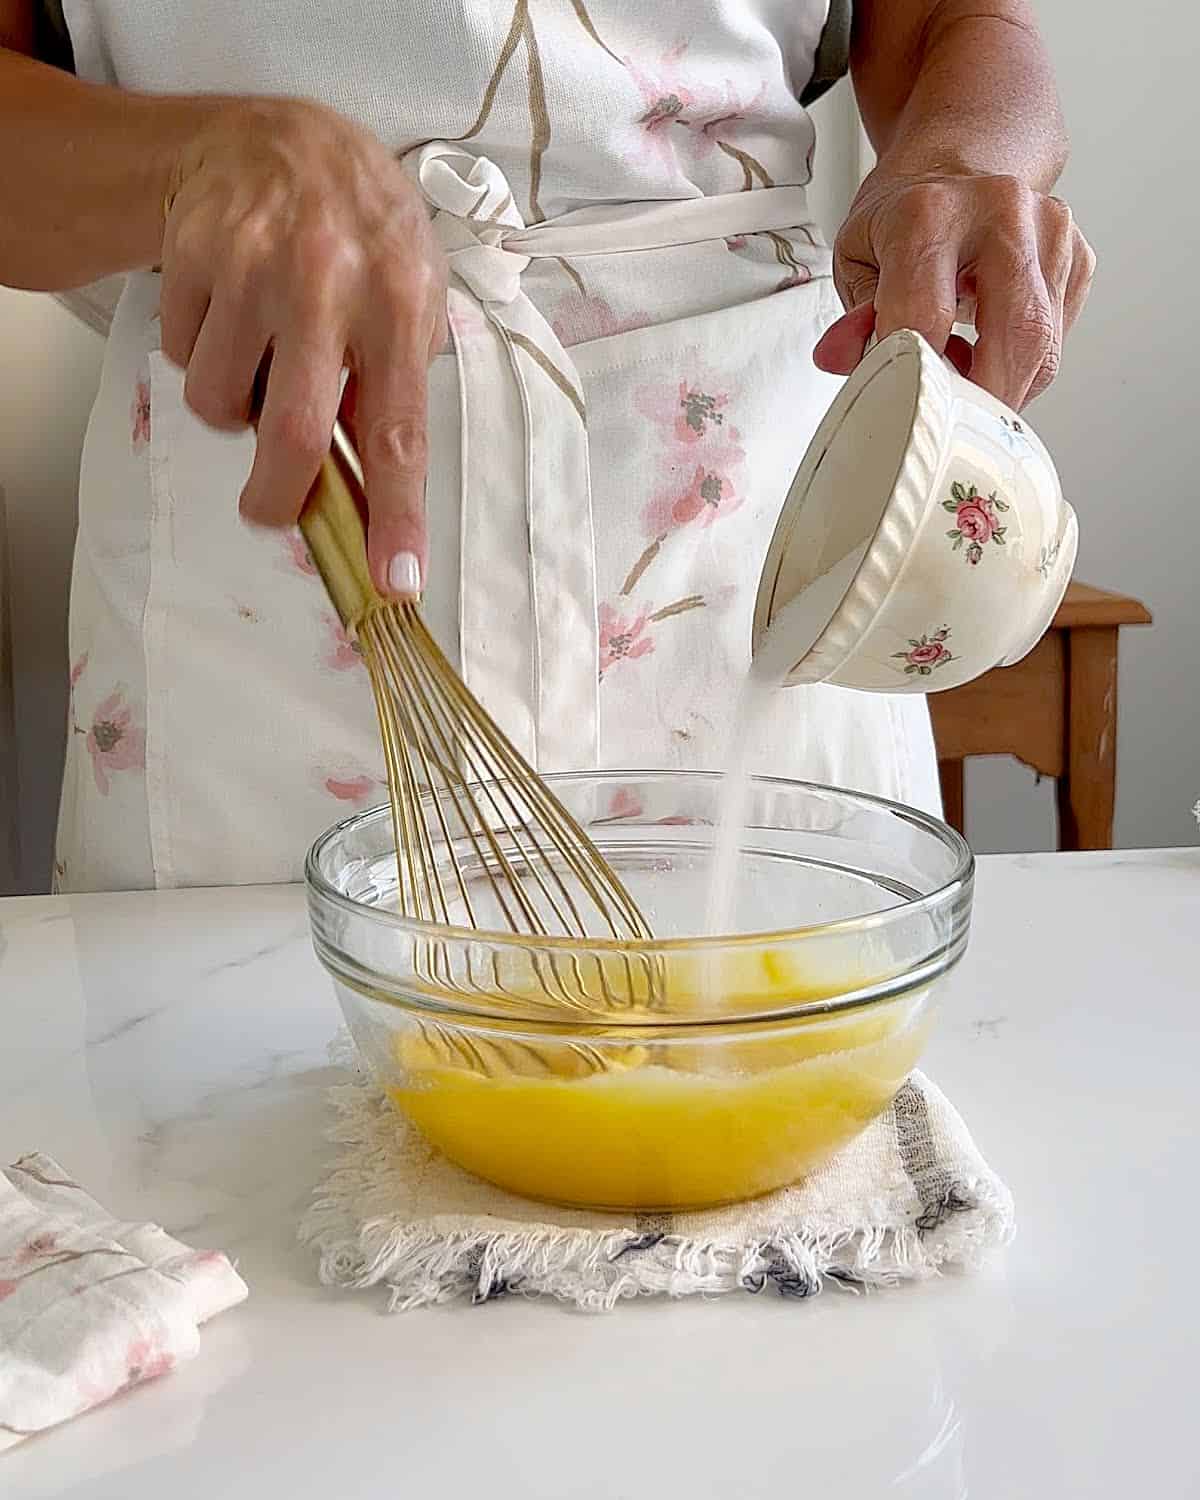 Adding sugar from an old-fashioned cup into egg mixture in a glass bowl. Gold whisk.